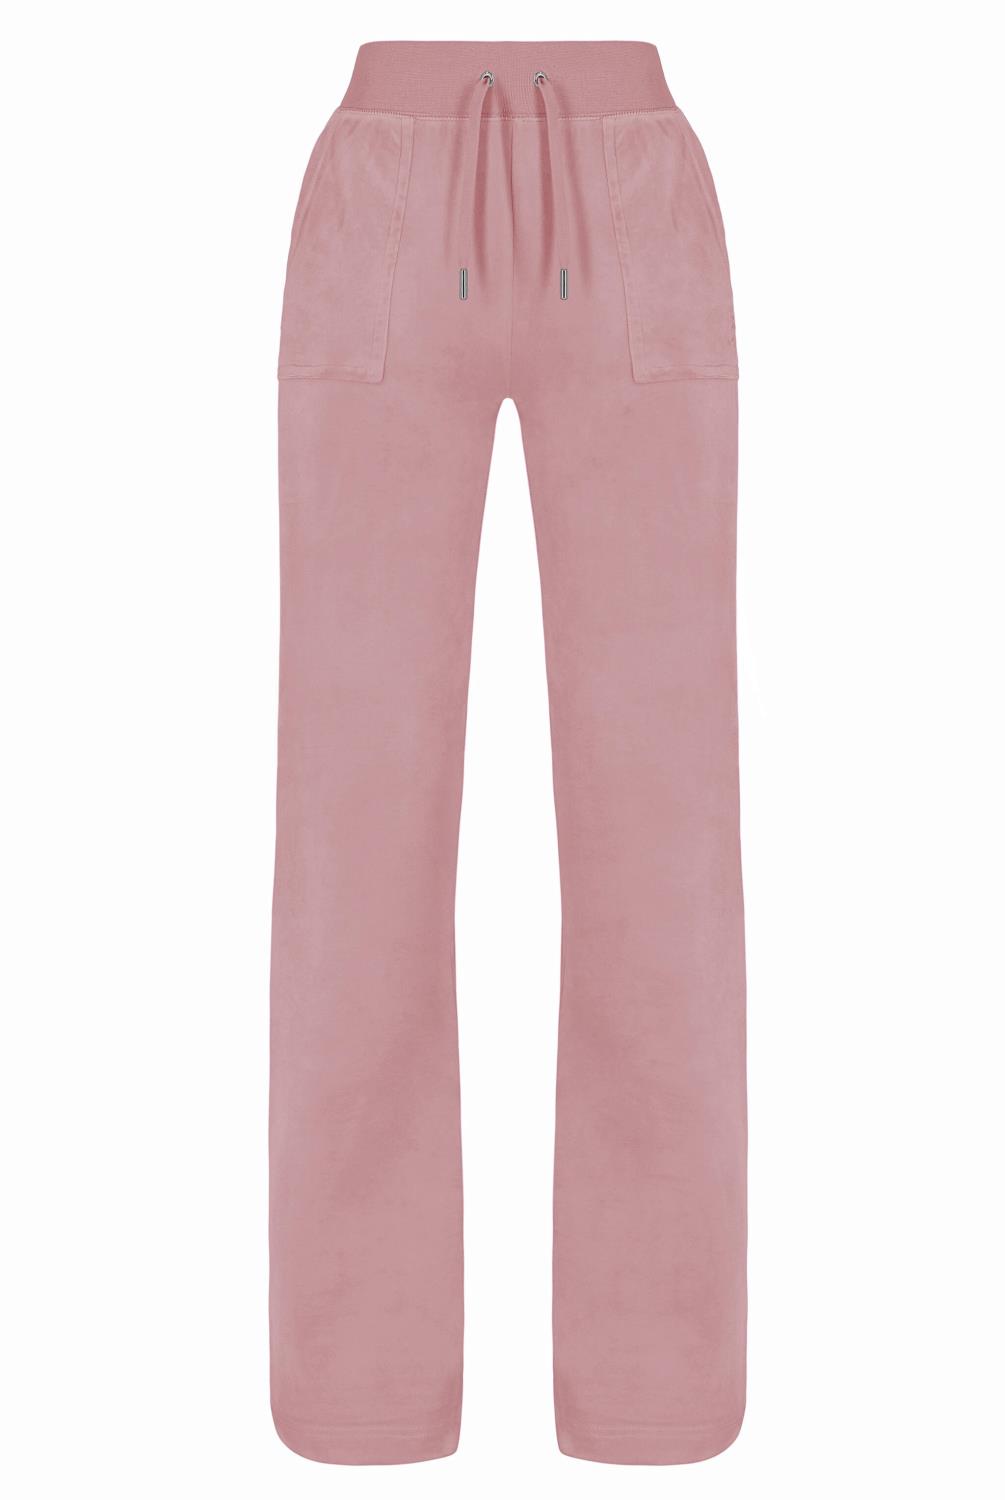 Juicy Couture, Classic Del Ray Pant Zephyr